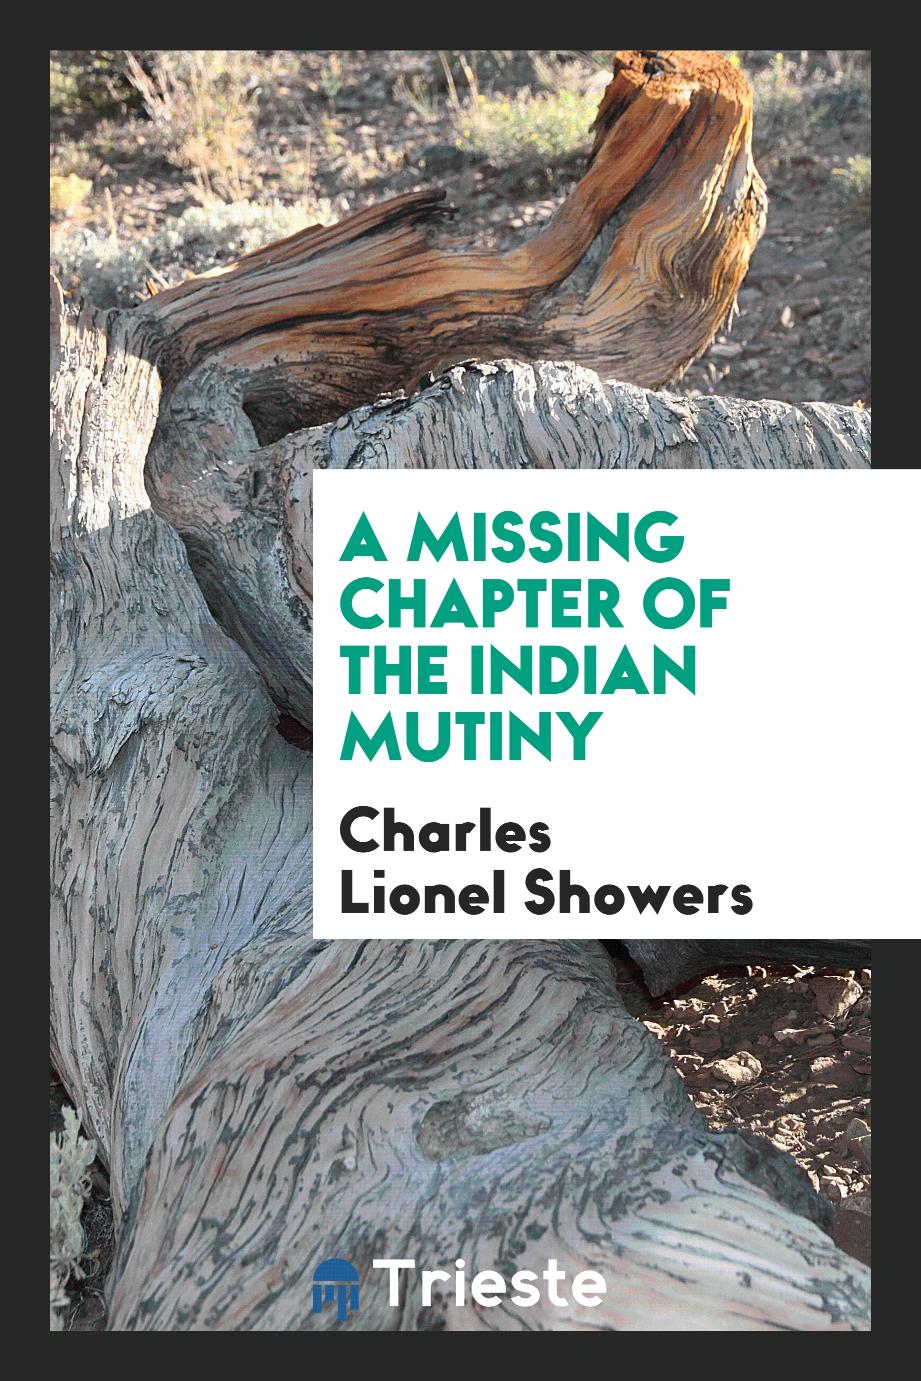 A Missing Chapter of the Indian Mutiny